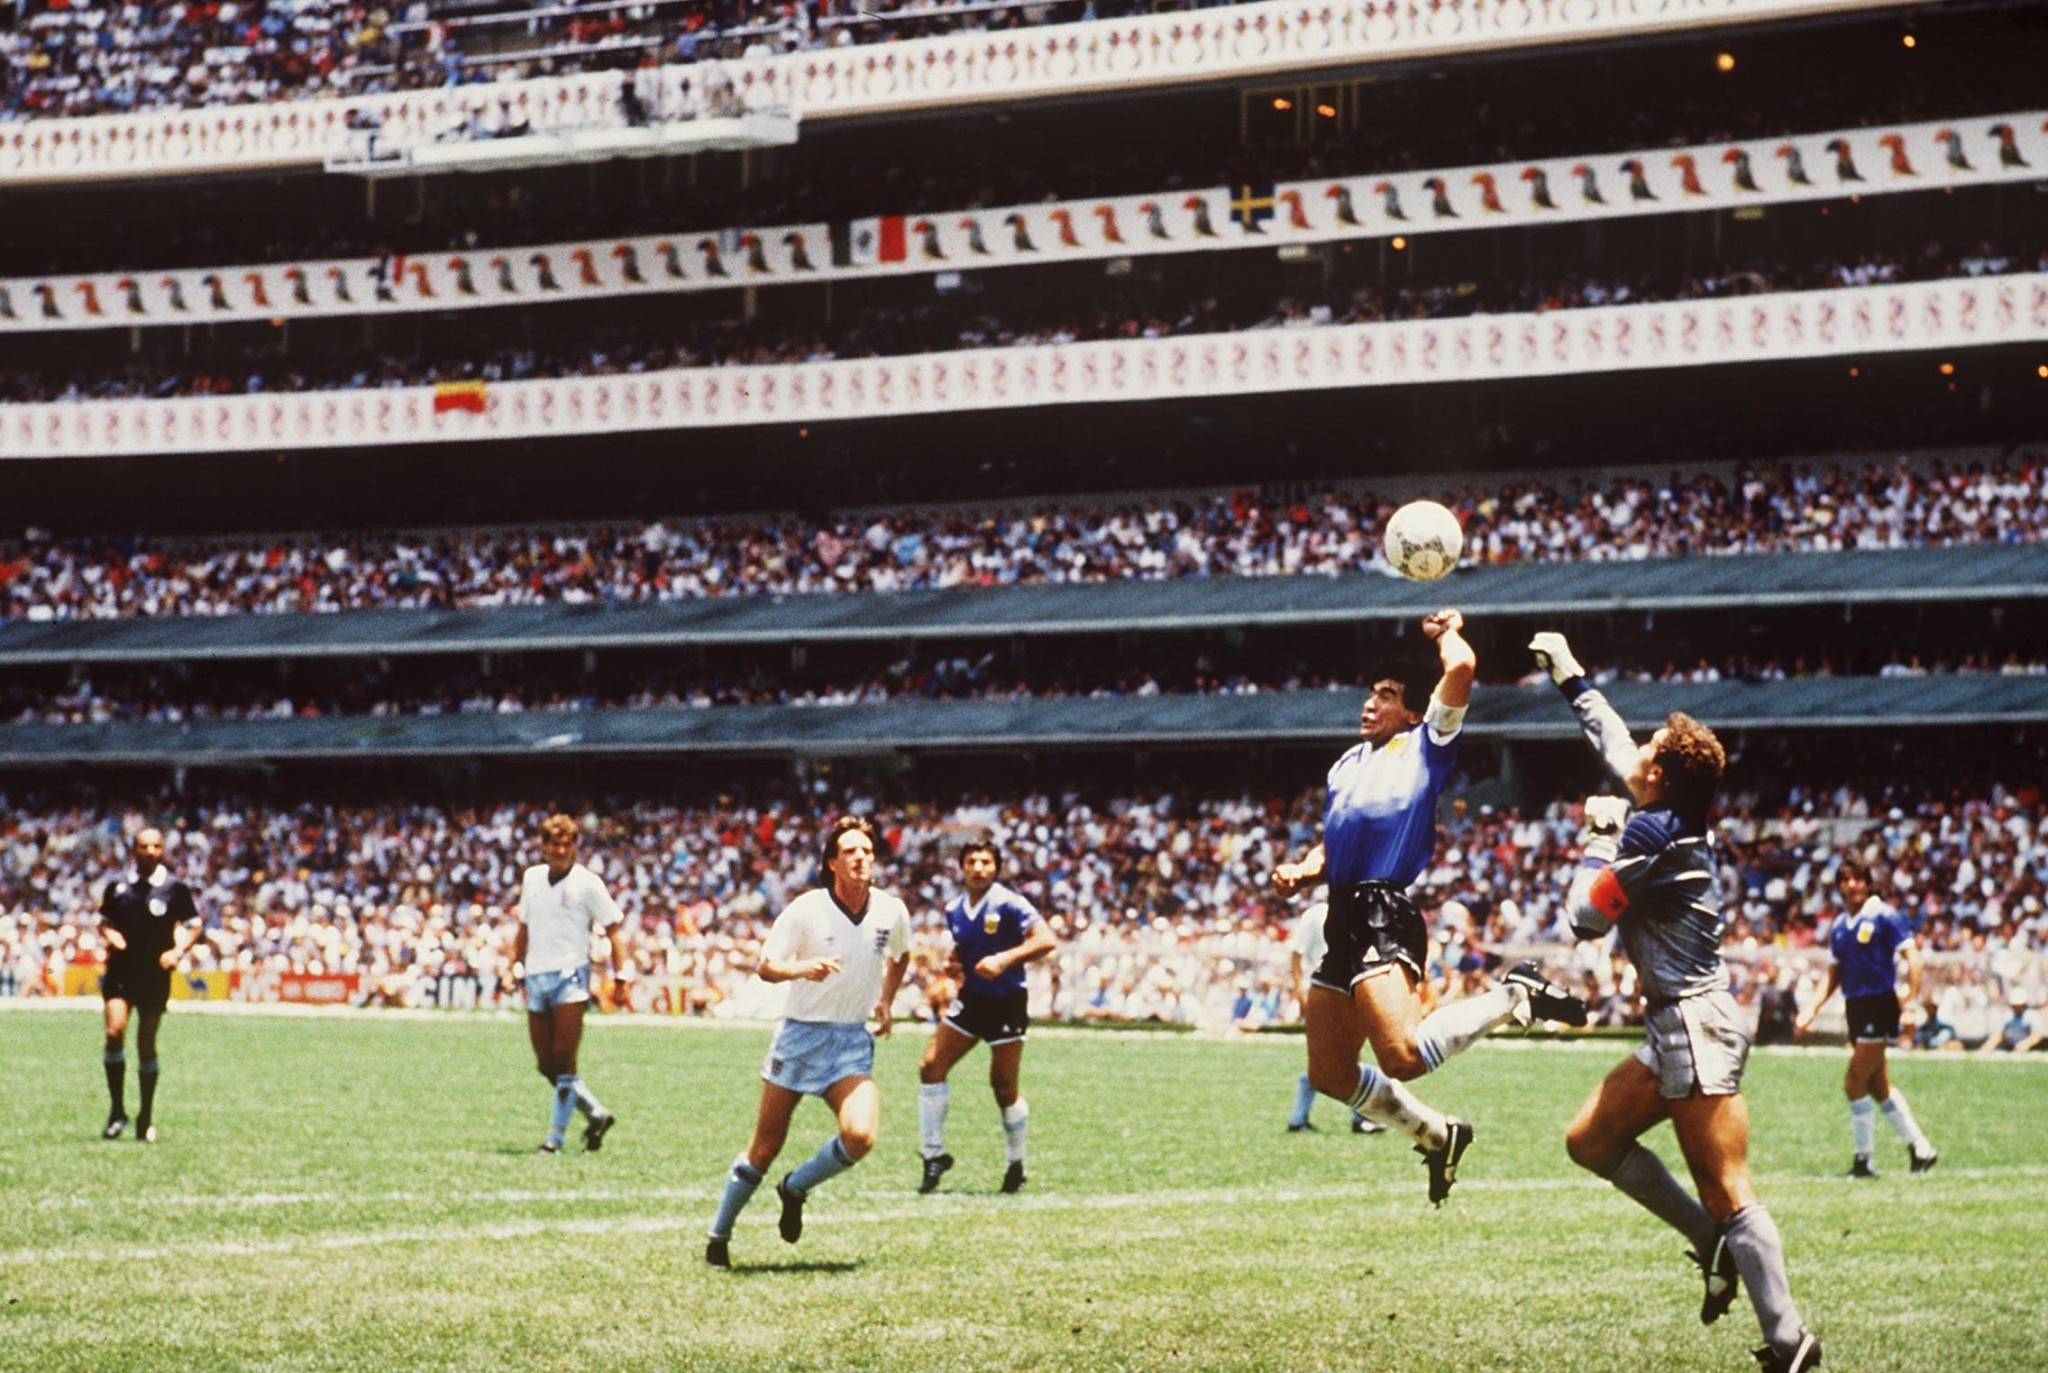 Diego Maradona infamously scored a goal with his hand in the 1986 World Cup quarter-final ©Getty Images